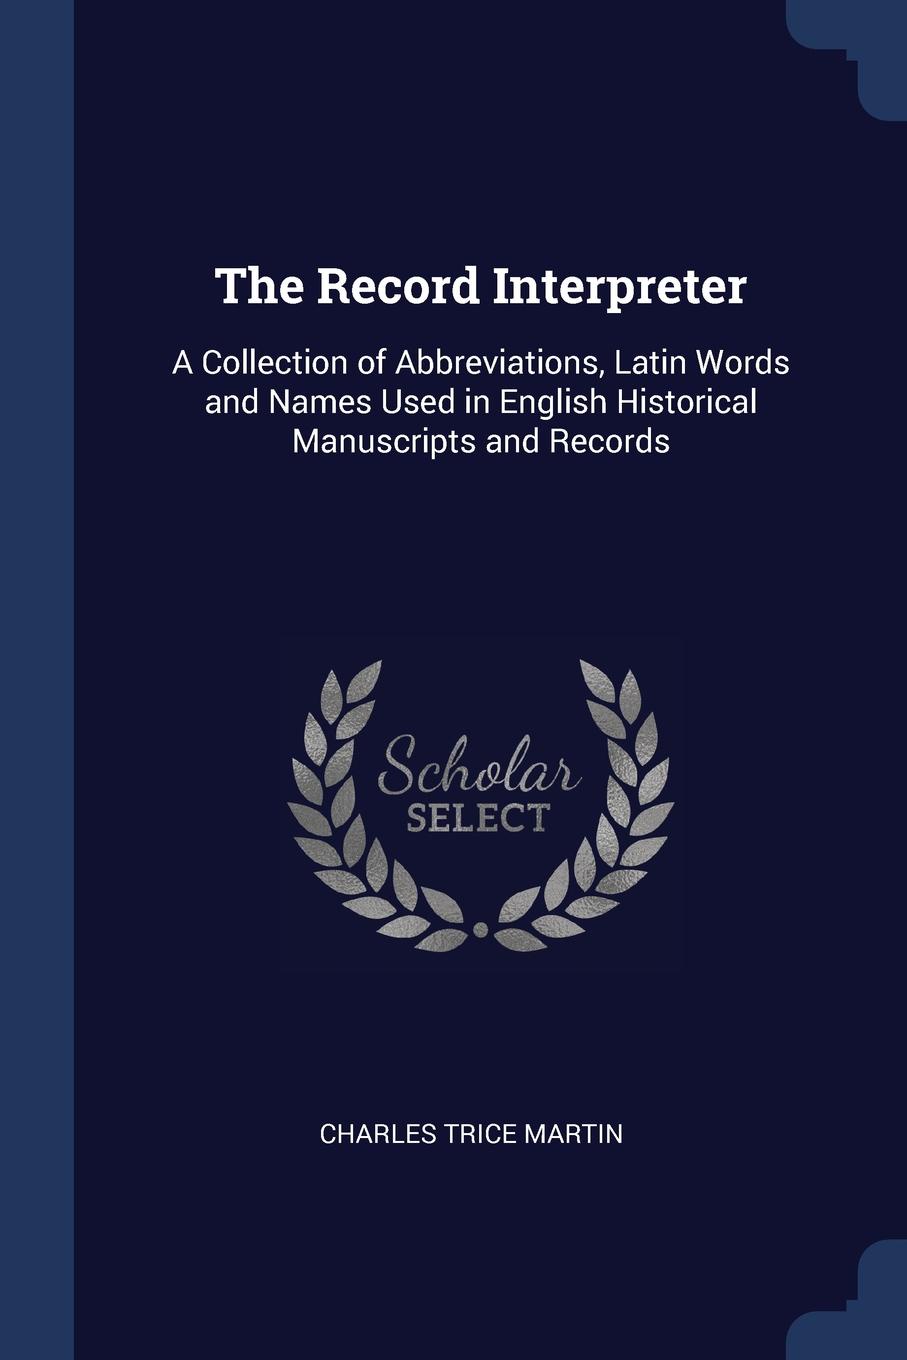 The Record Interpreter. A Collection of Abbreviations, Latin Words and Names Used in English Historical Manuscripts and Records